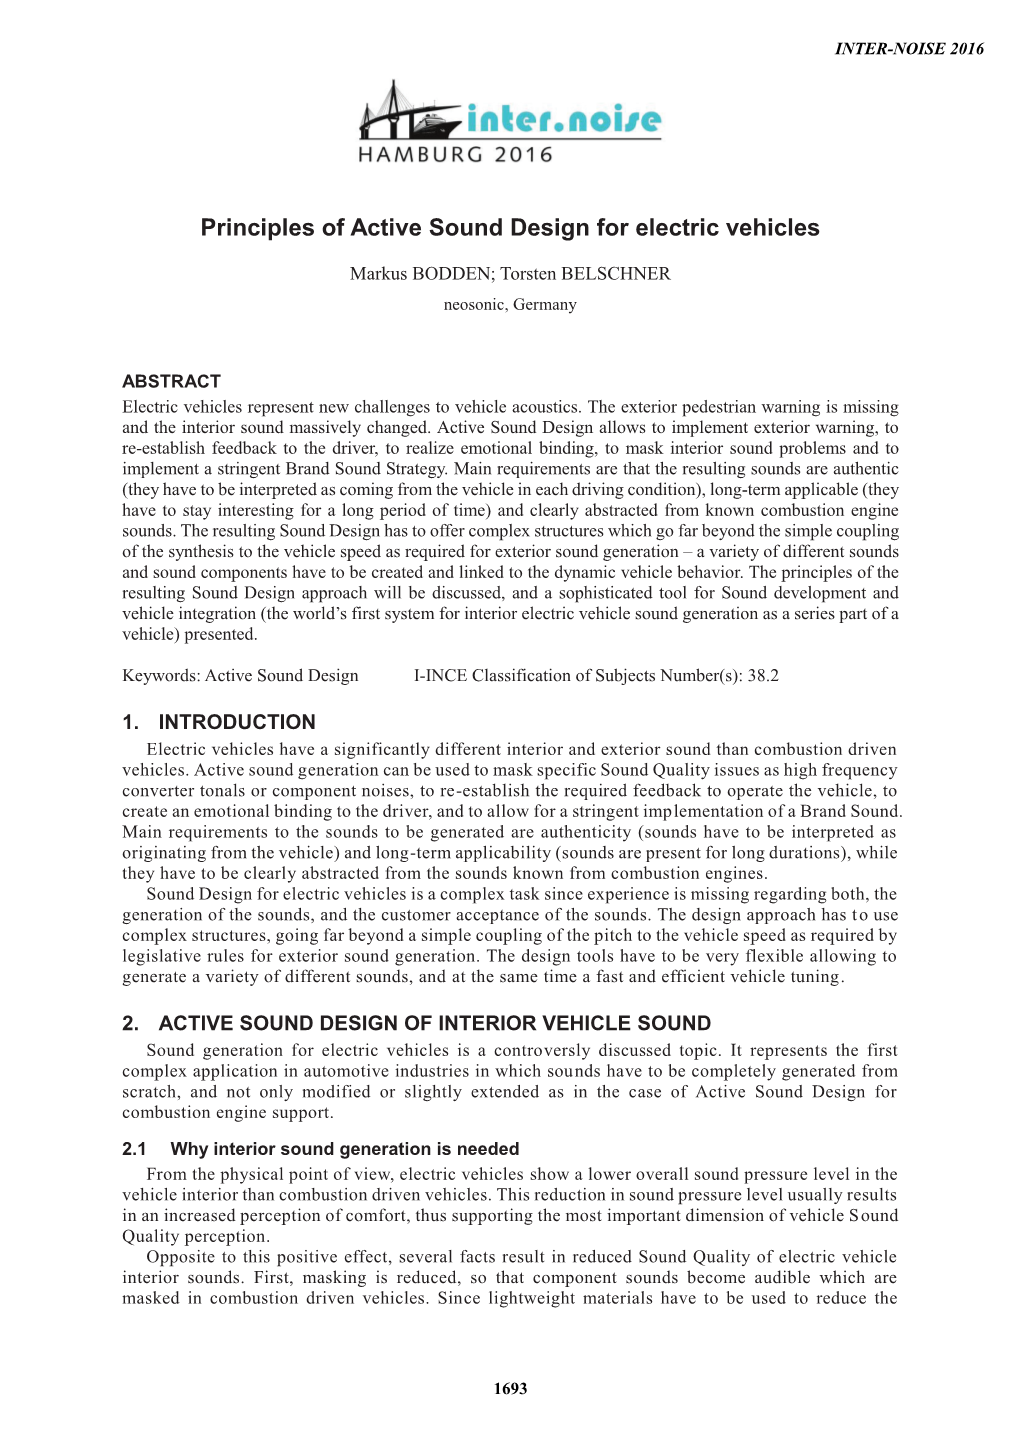 Principles of Active Sound Design for Electric Vehicles